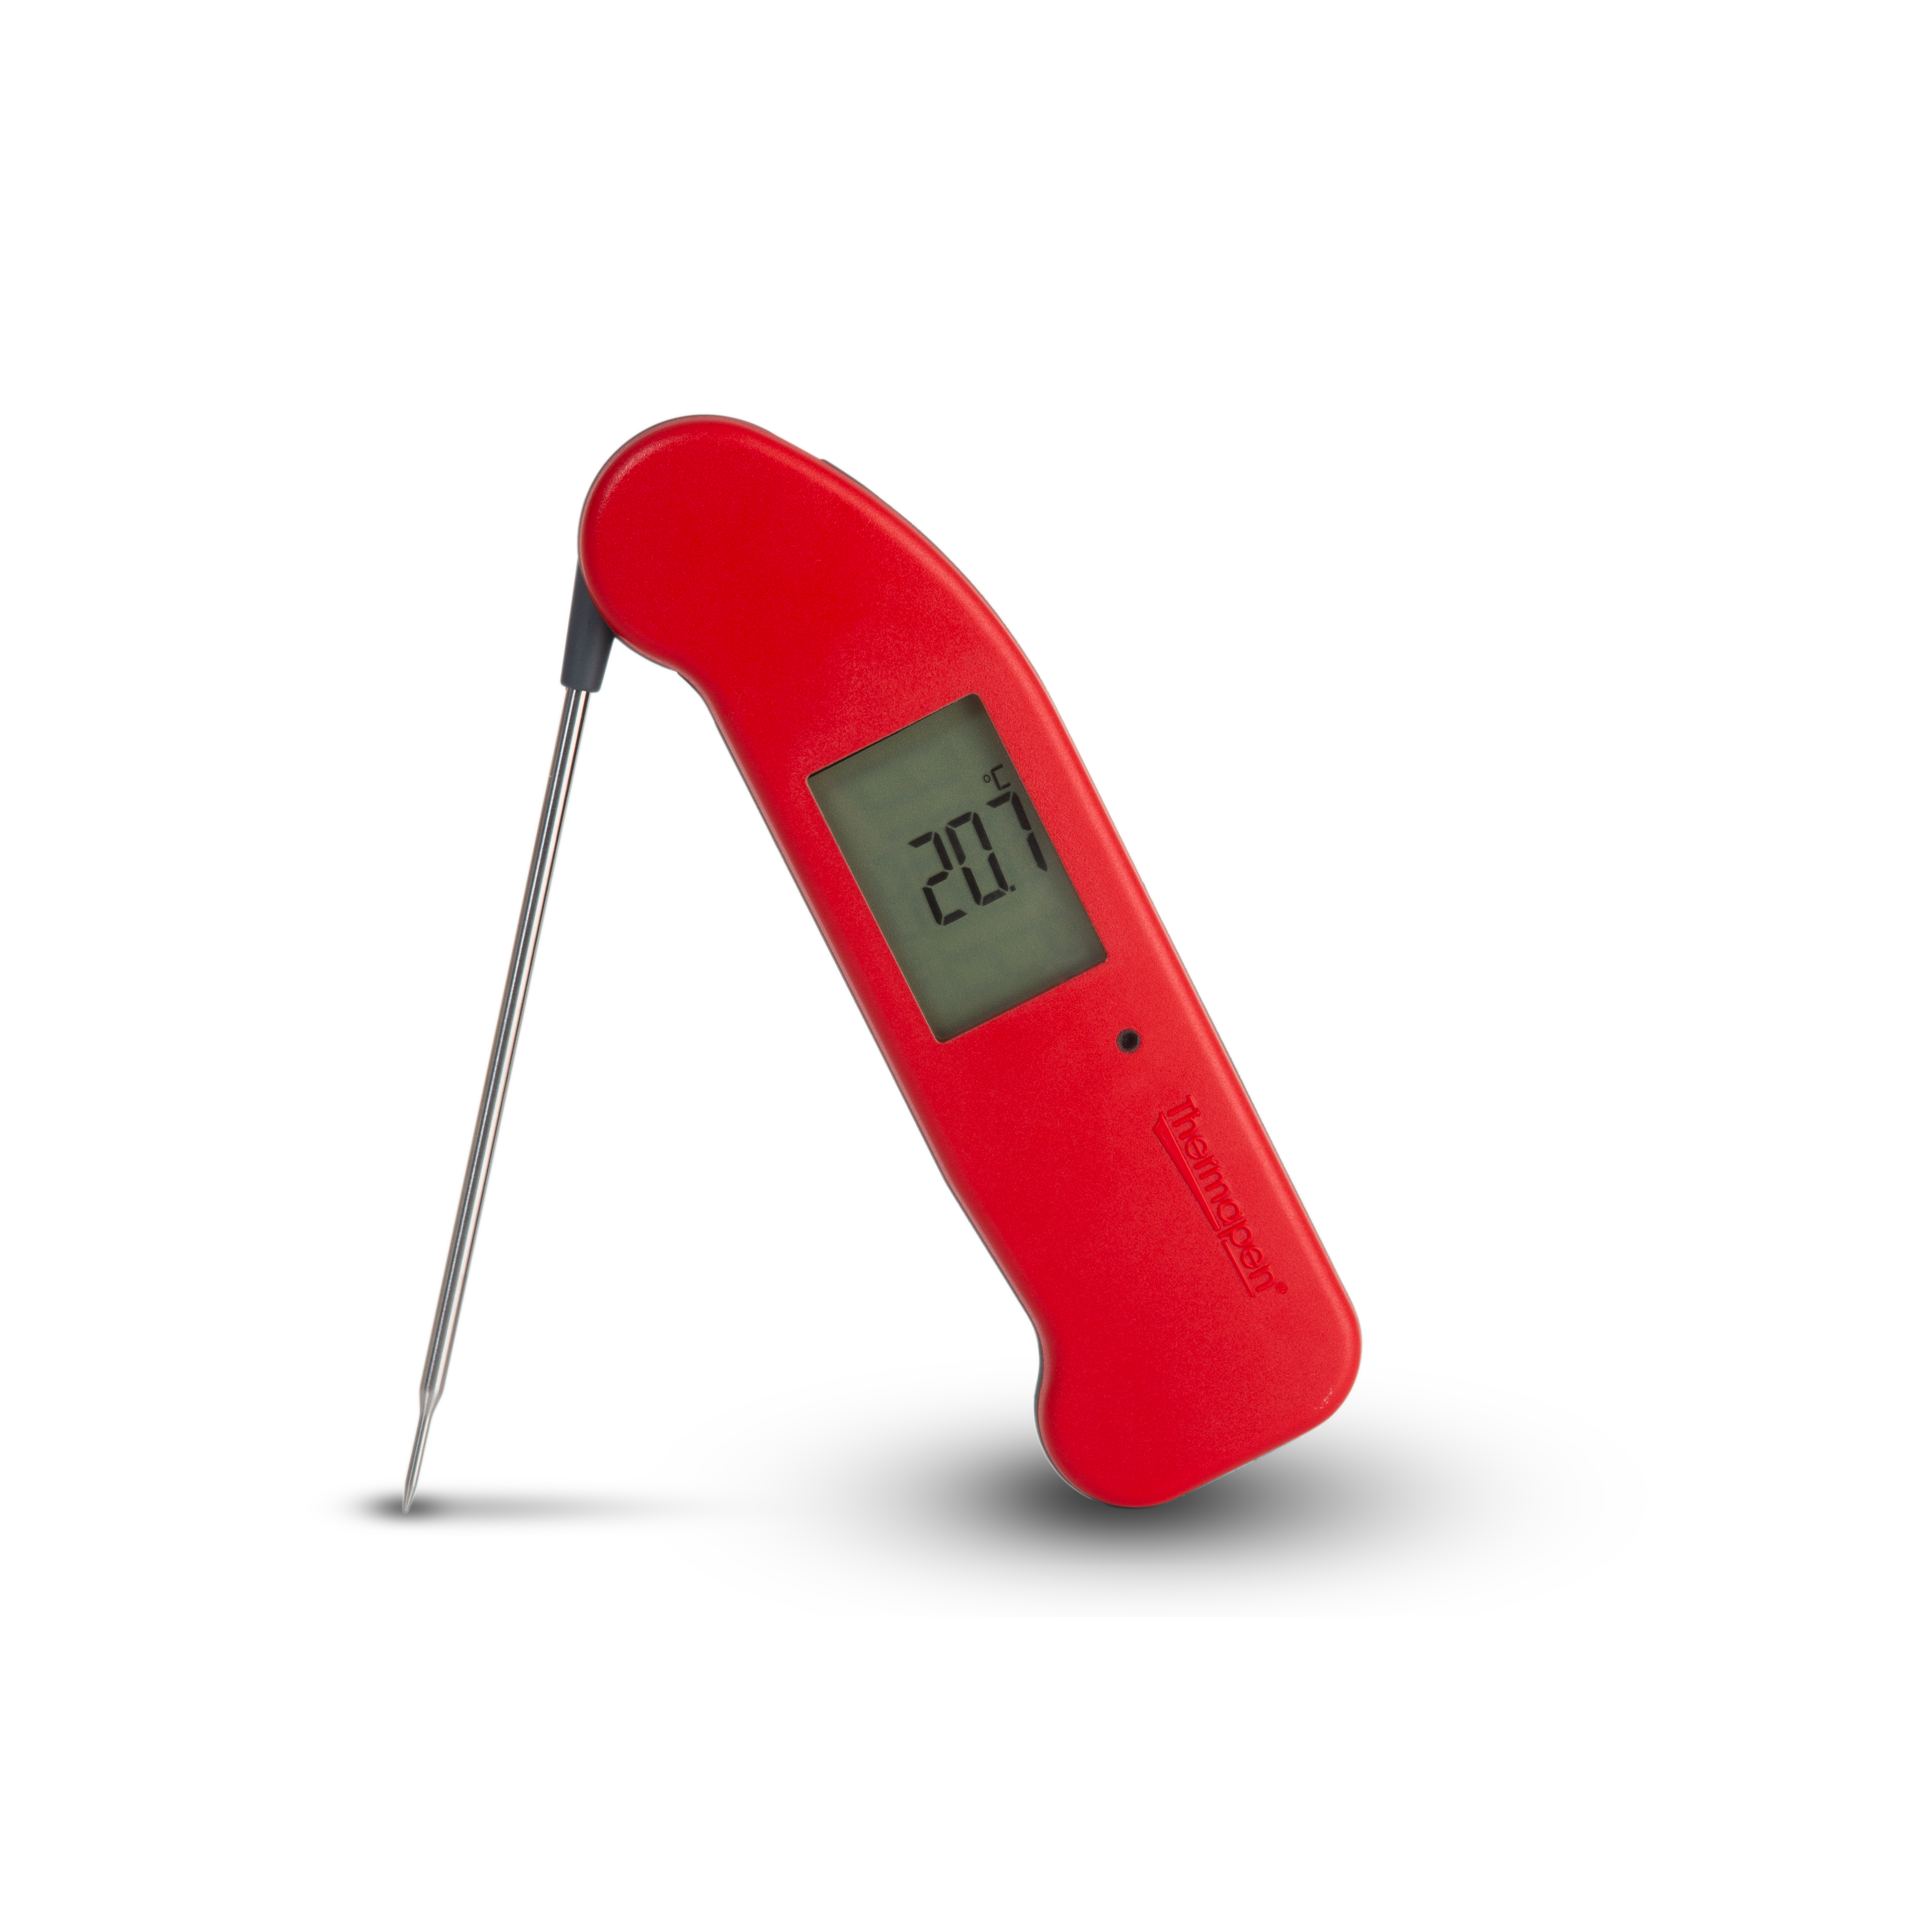 Thermapen One digital food thermometer launched